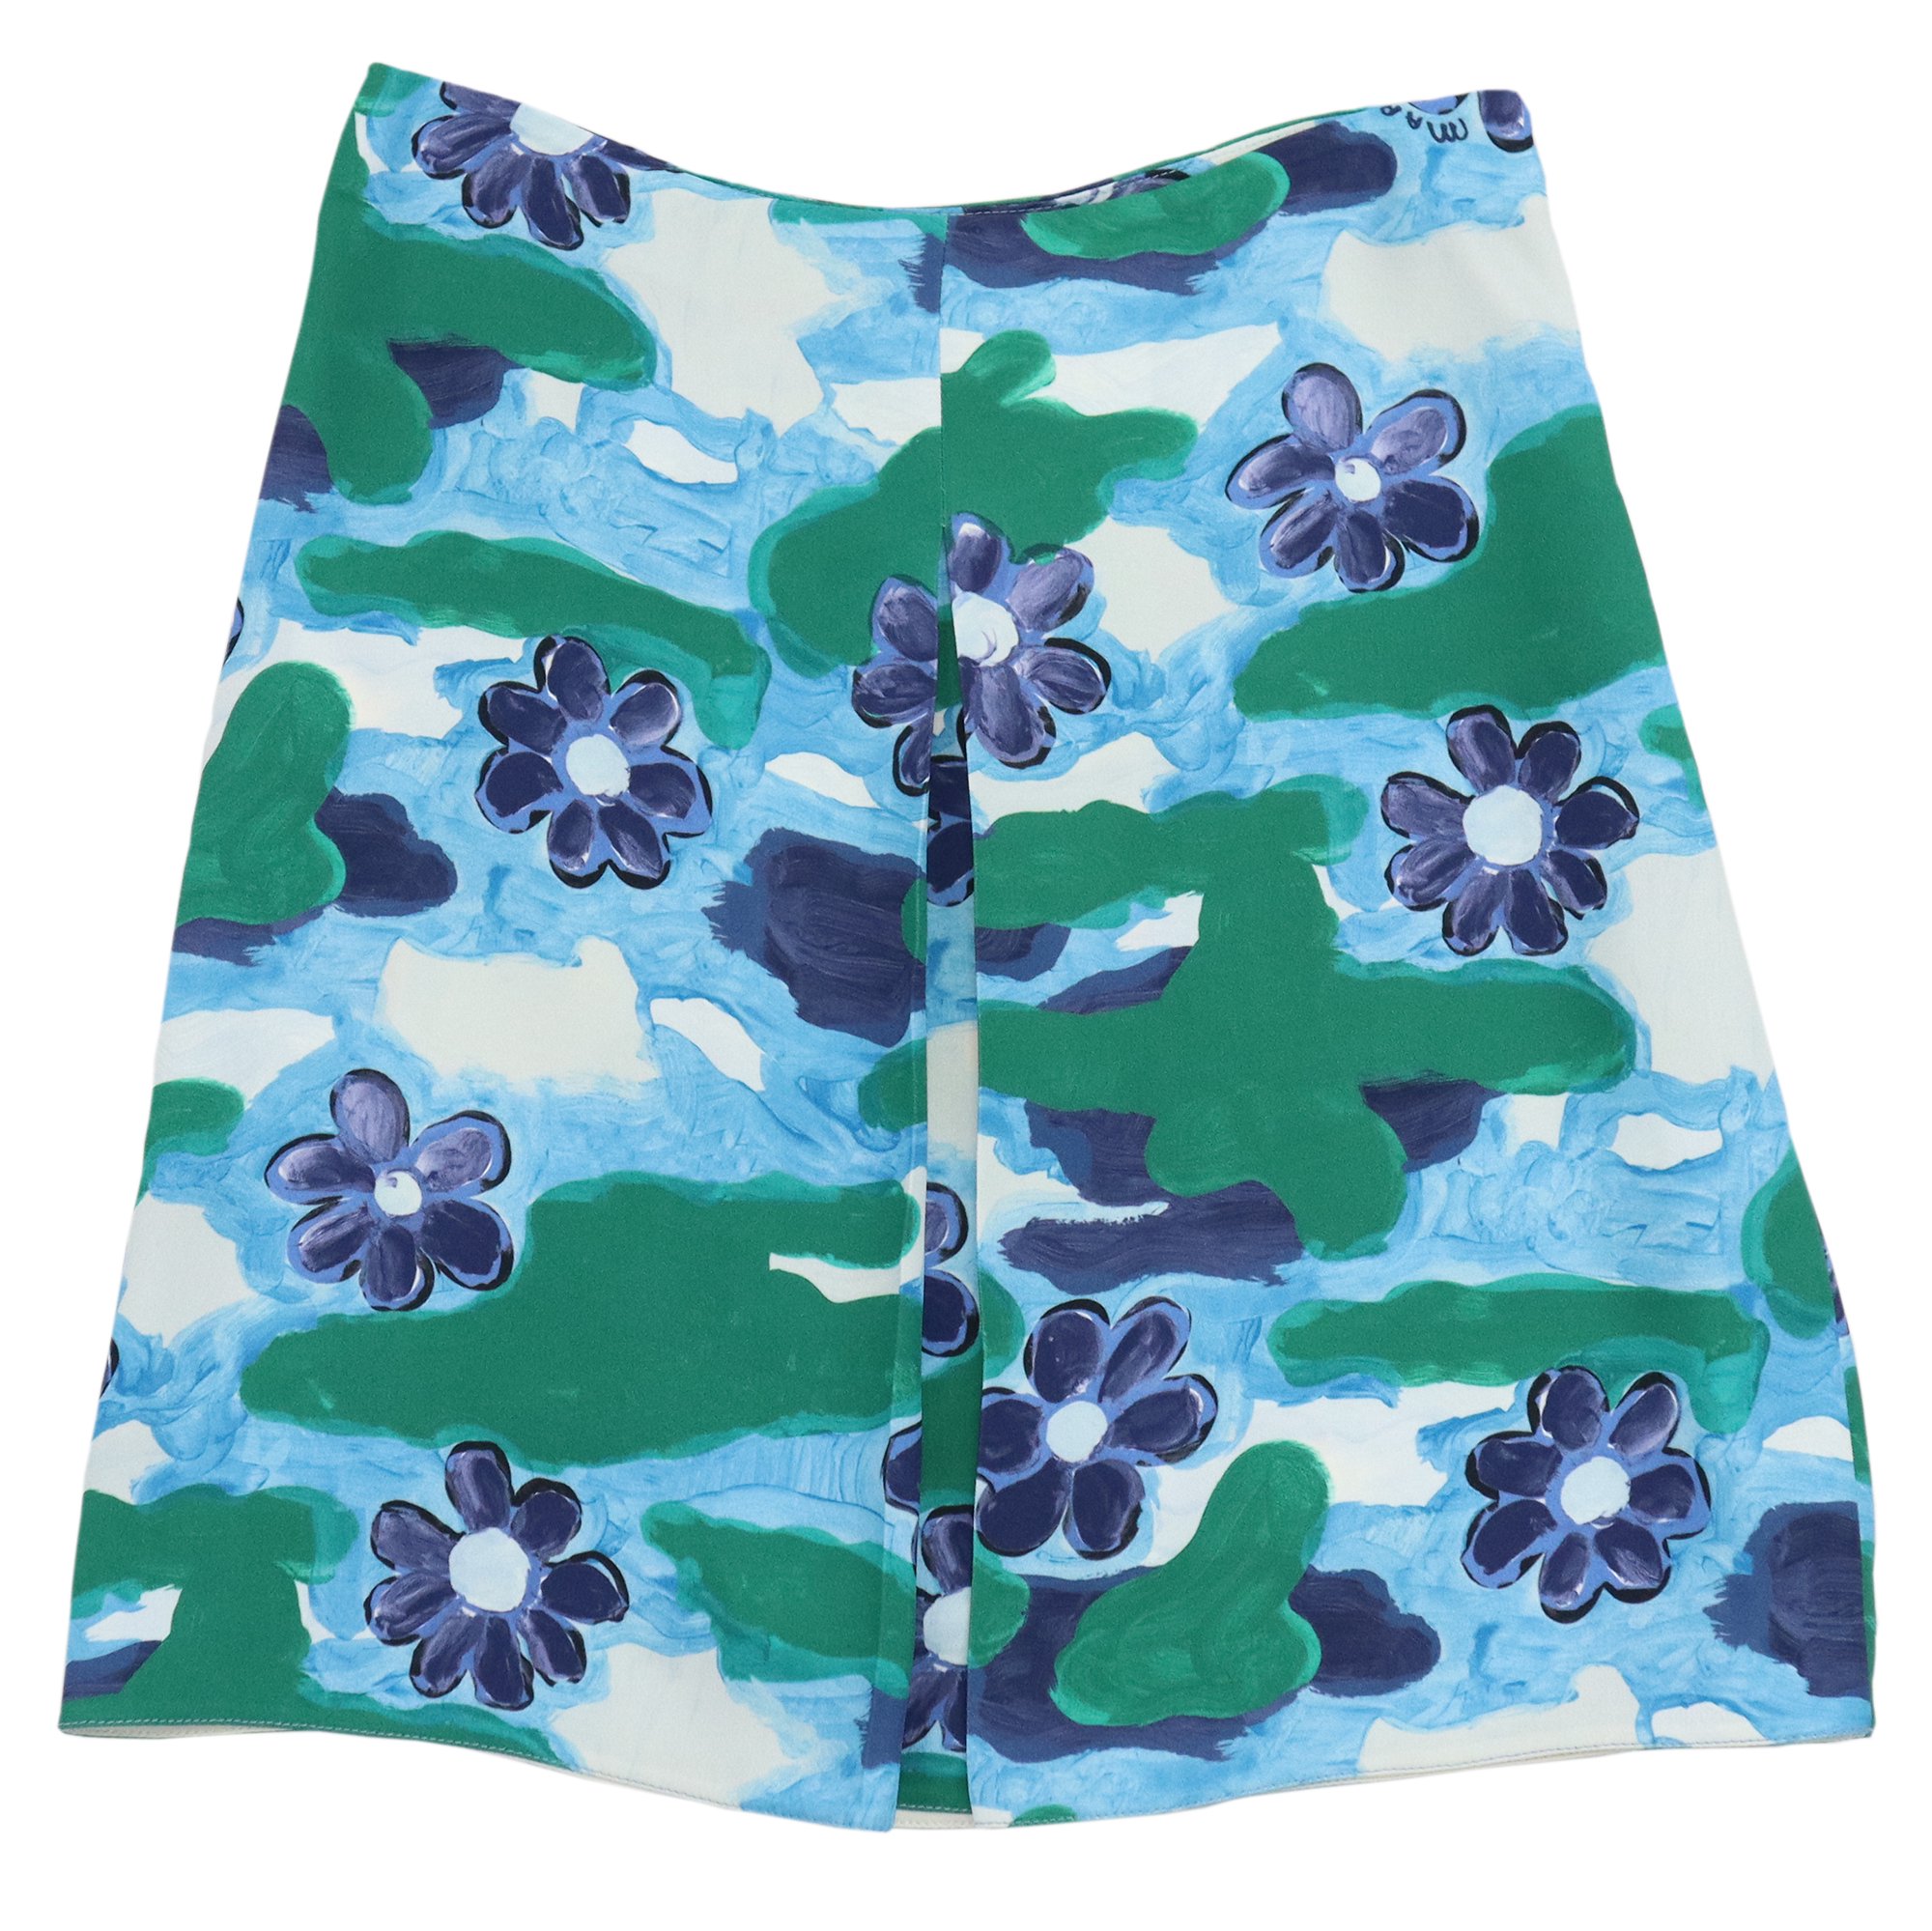 <img class='new_mark_img1' src='https://img.shop-pro.jp/img/new/icons6.gif' style='border:none;display:inline;margin:0px;padding:0px;width:auto;' />MARNI Skirt【BLUE】